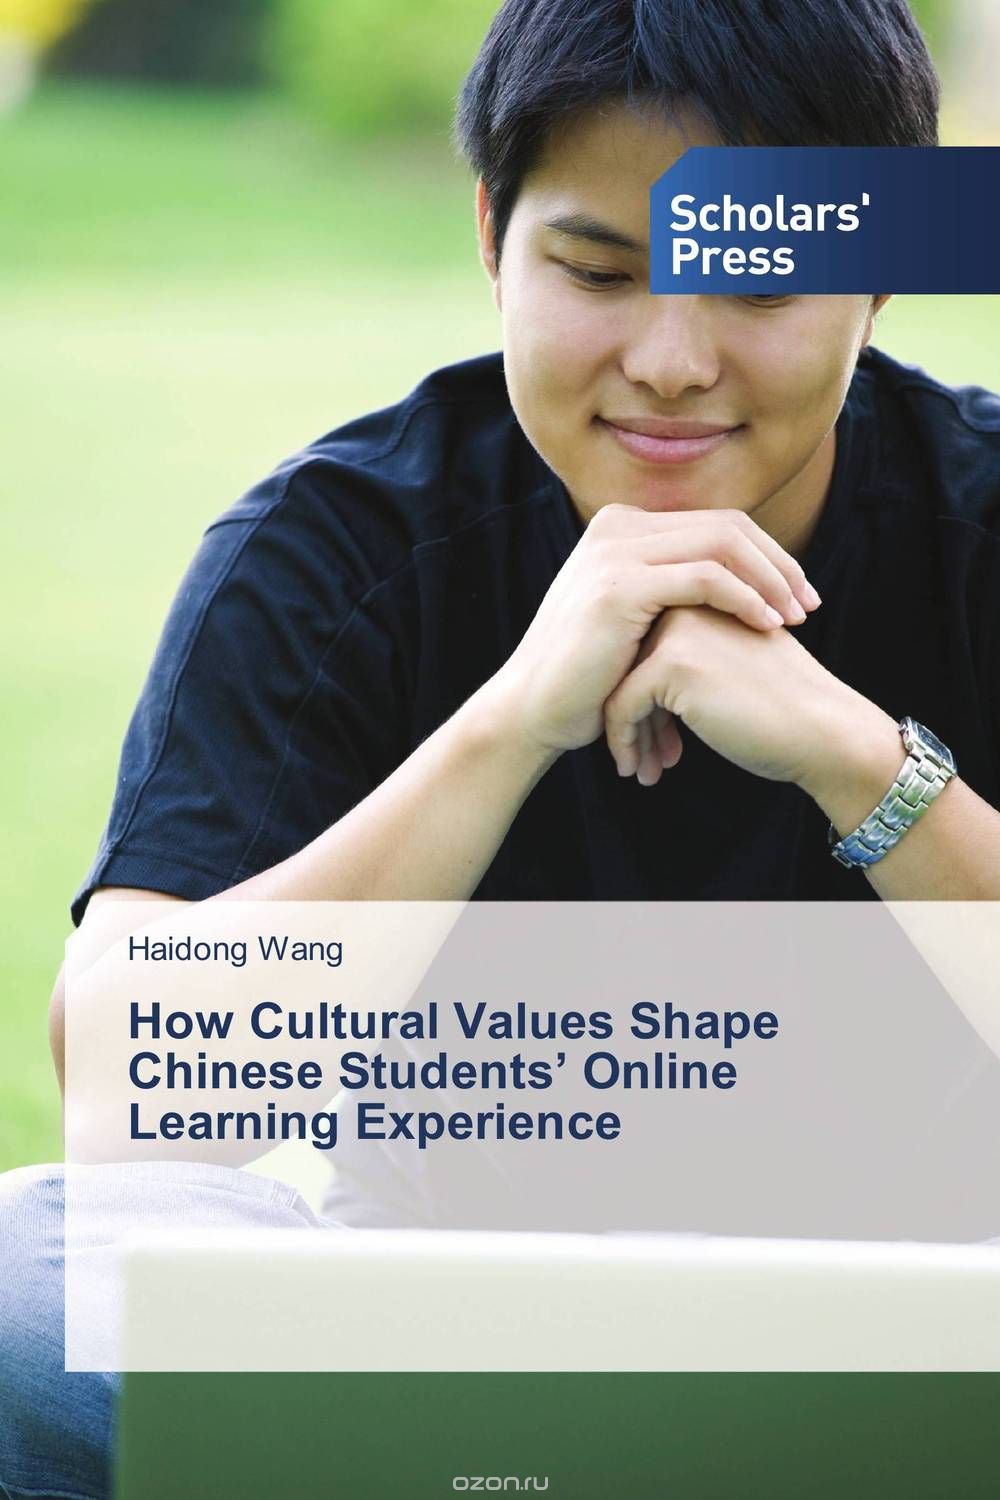 How Cultural Values Shape Chinese Students’ Online Learning Experience